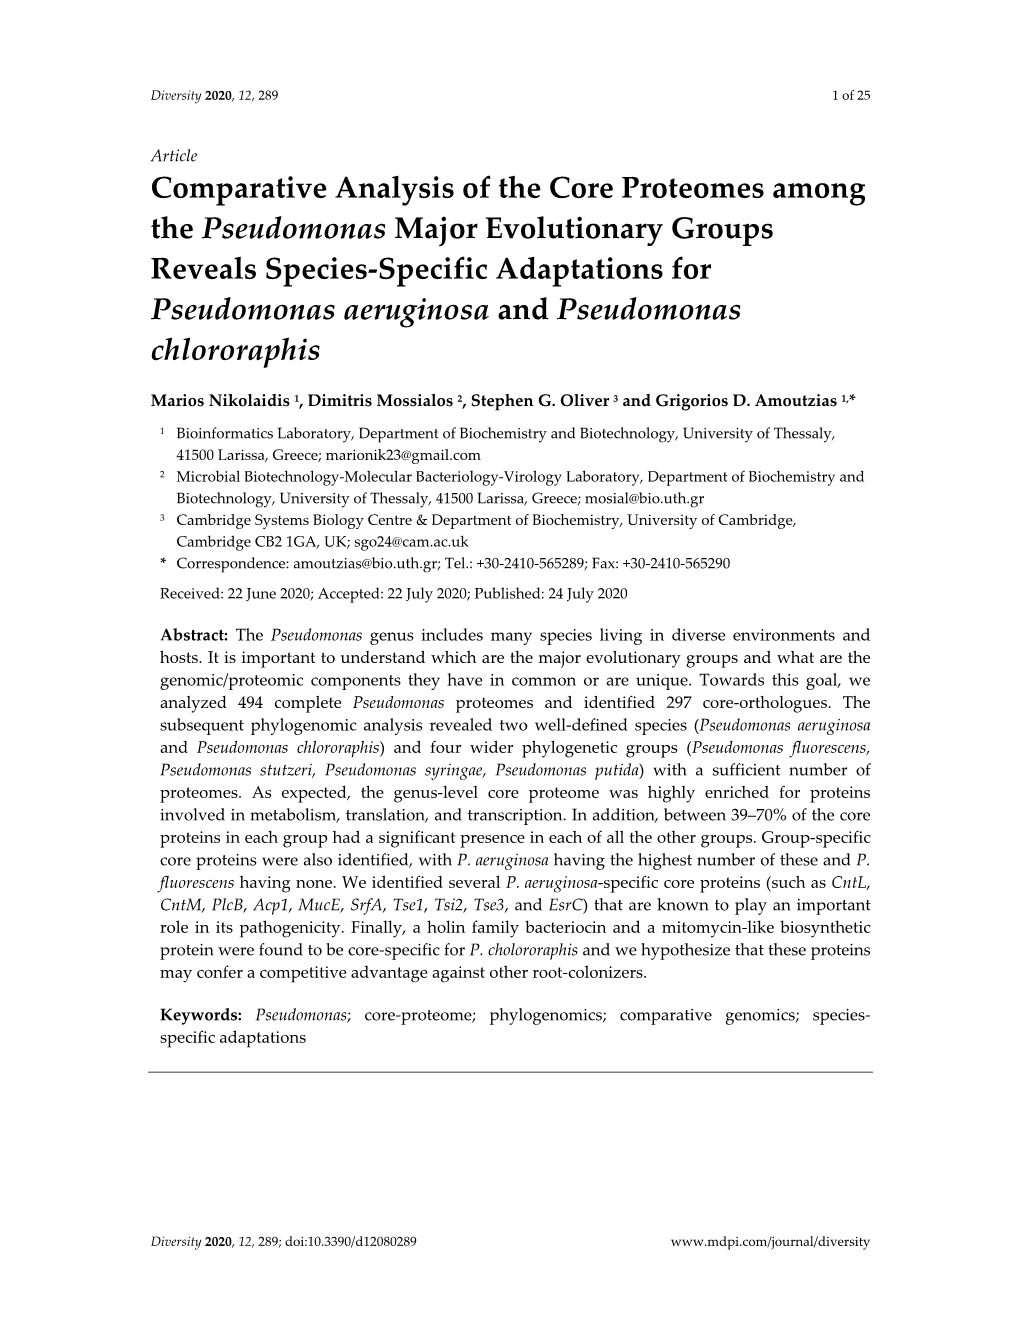 Comparative Analysis of the Core Proteomes Among The